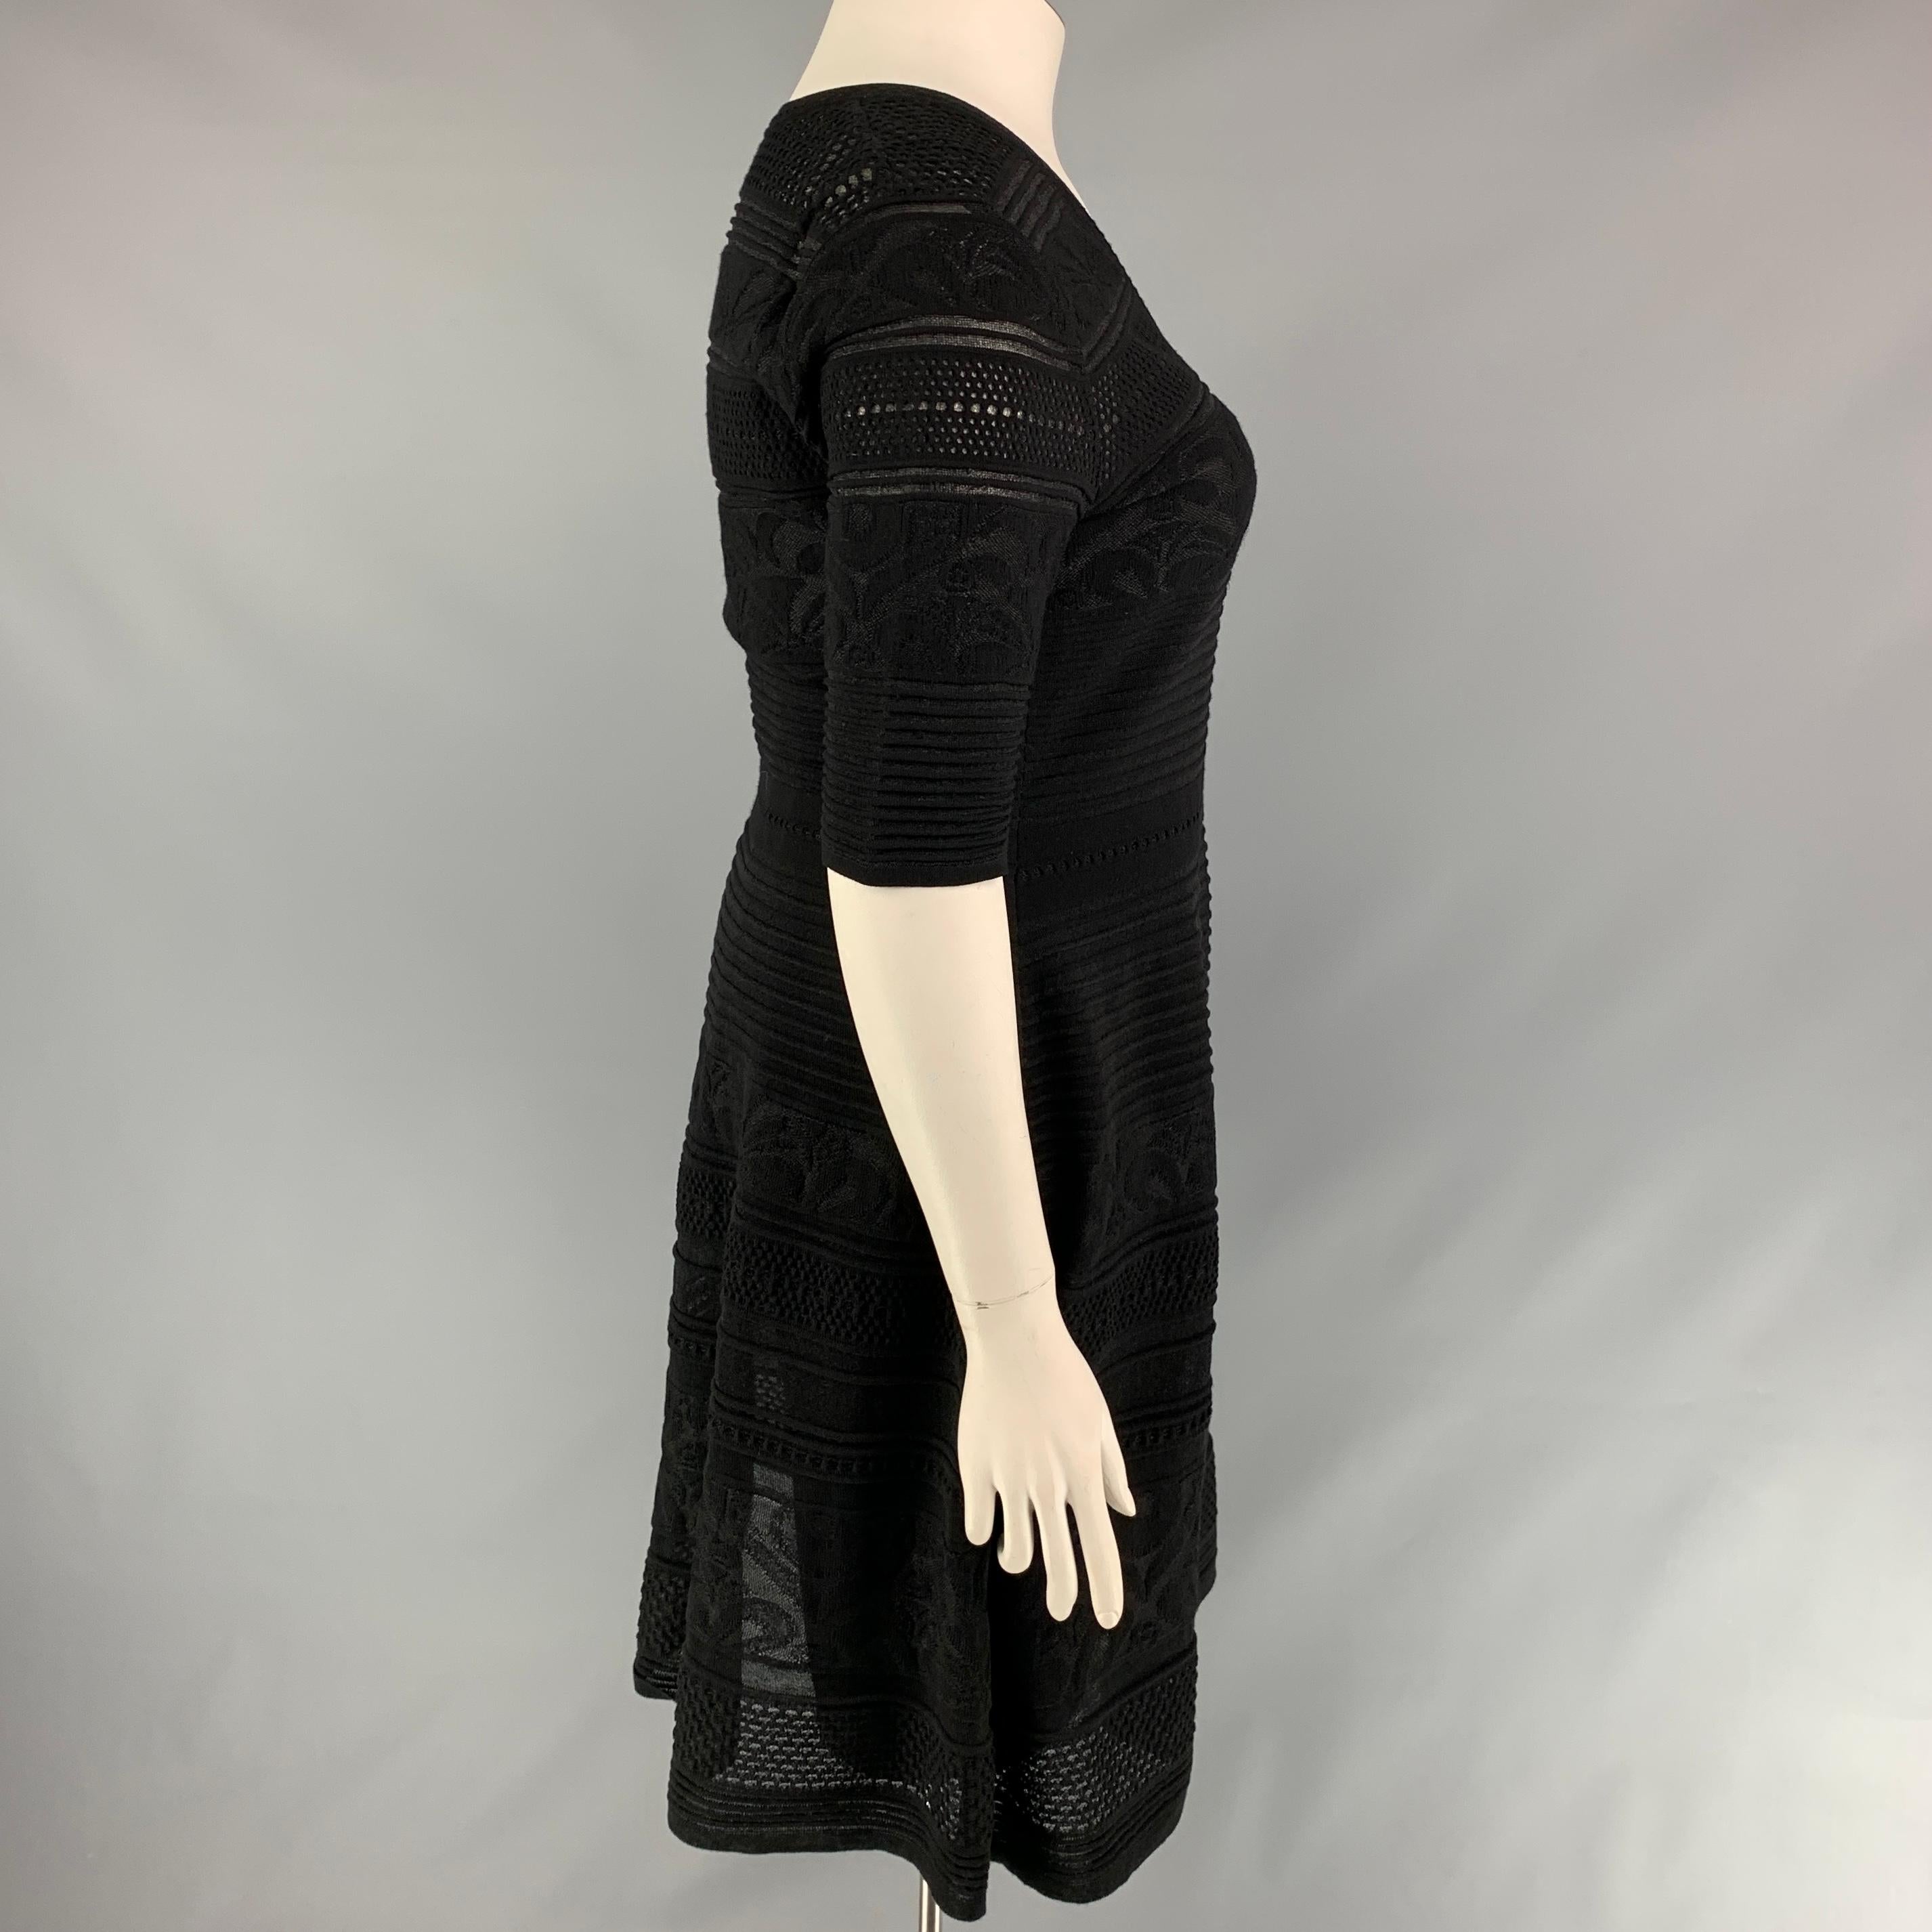 M MISSONI dress comes in a black knitted material with a slip liner featuring a a-line style, short sleeves, and a v-neck. Made in Italy. 

Very Good Pre-Owned Condition.
Marked: 48

Measurements:

Shoulder: 17 in.
Bust: 36 in.
Waist: 33 in.
Hip: 45